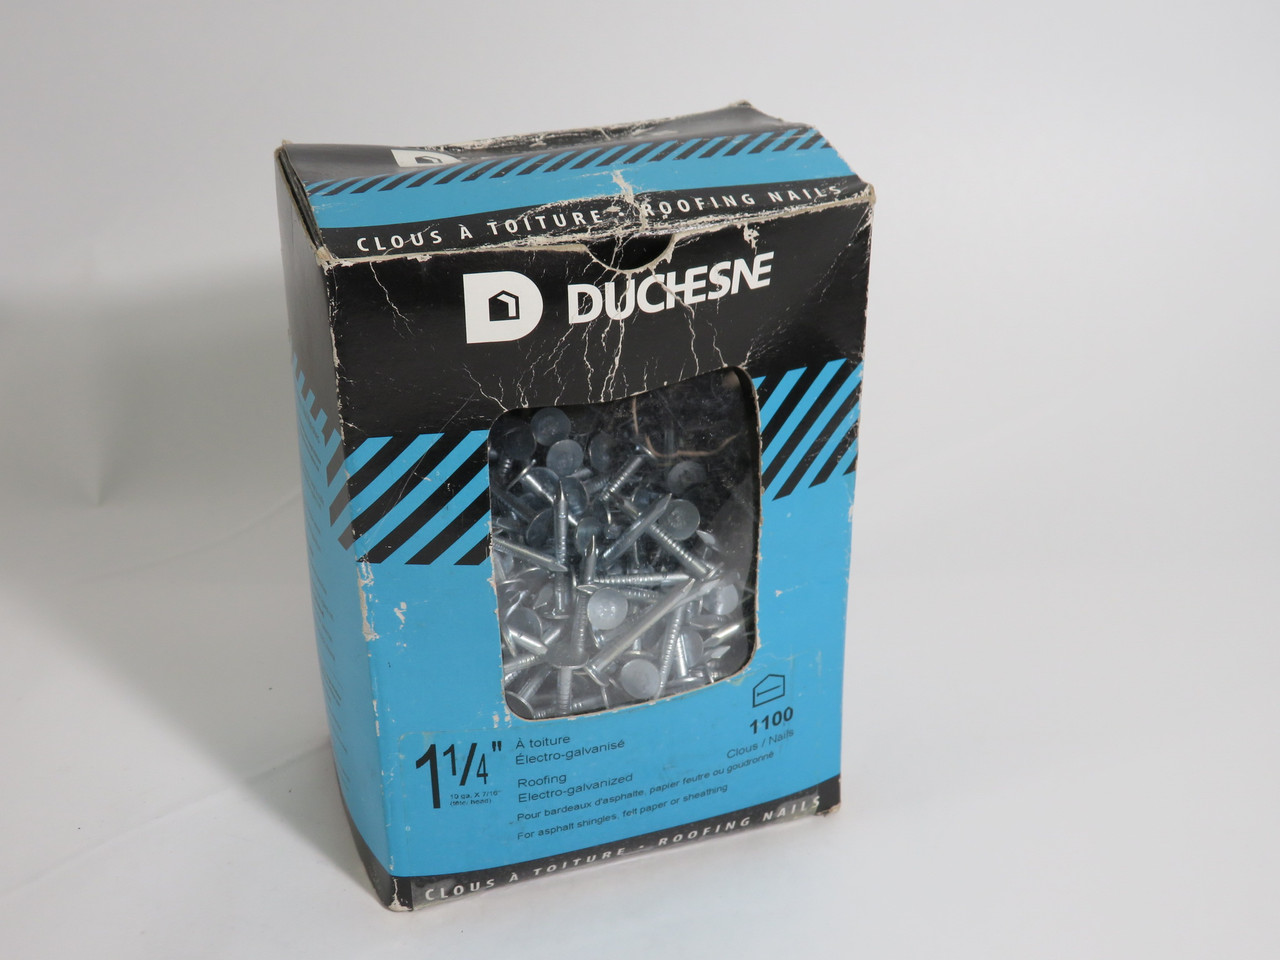 Duchesne Roofing Nails 1-1/4" Lot of 872 NEW